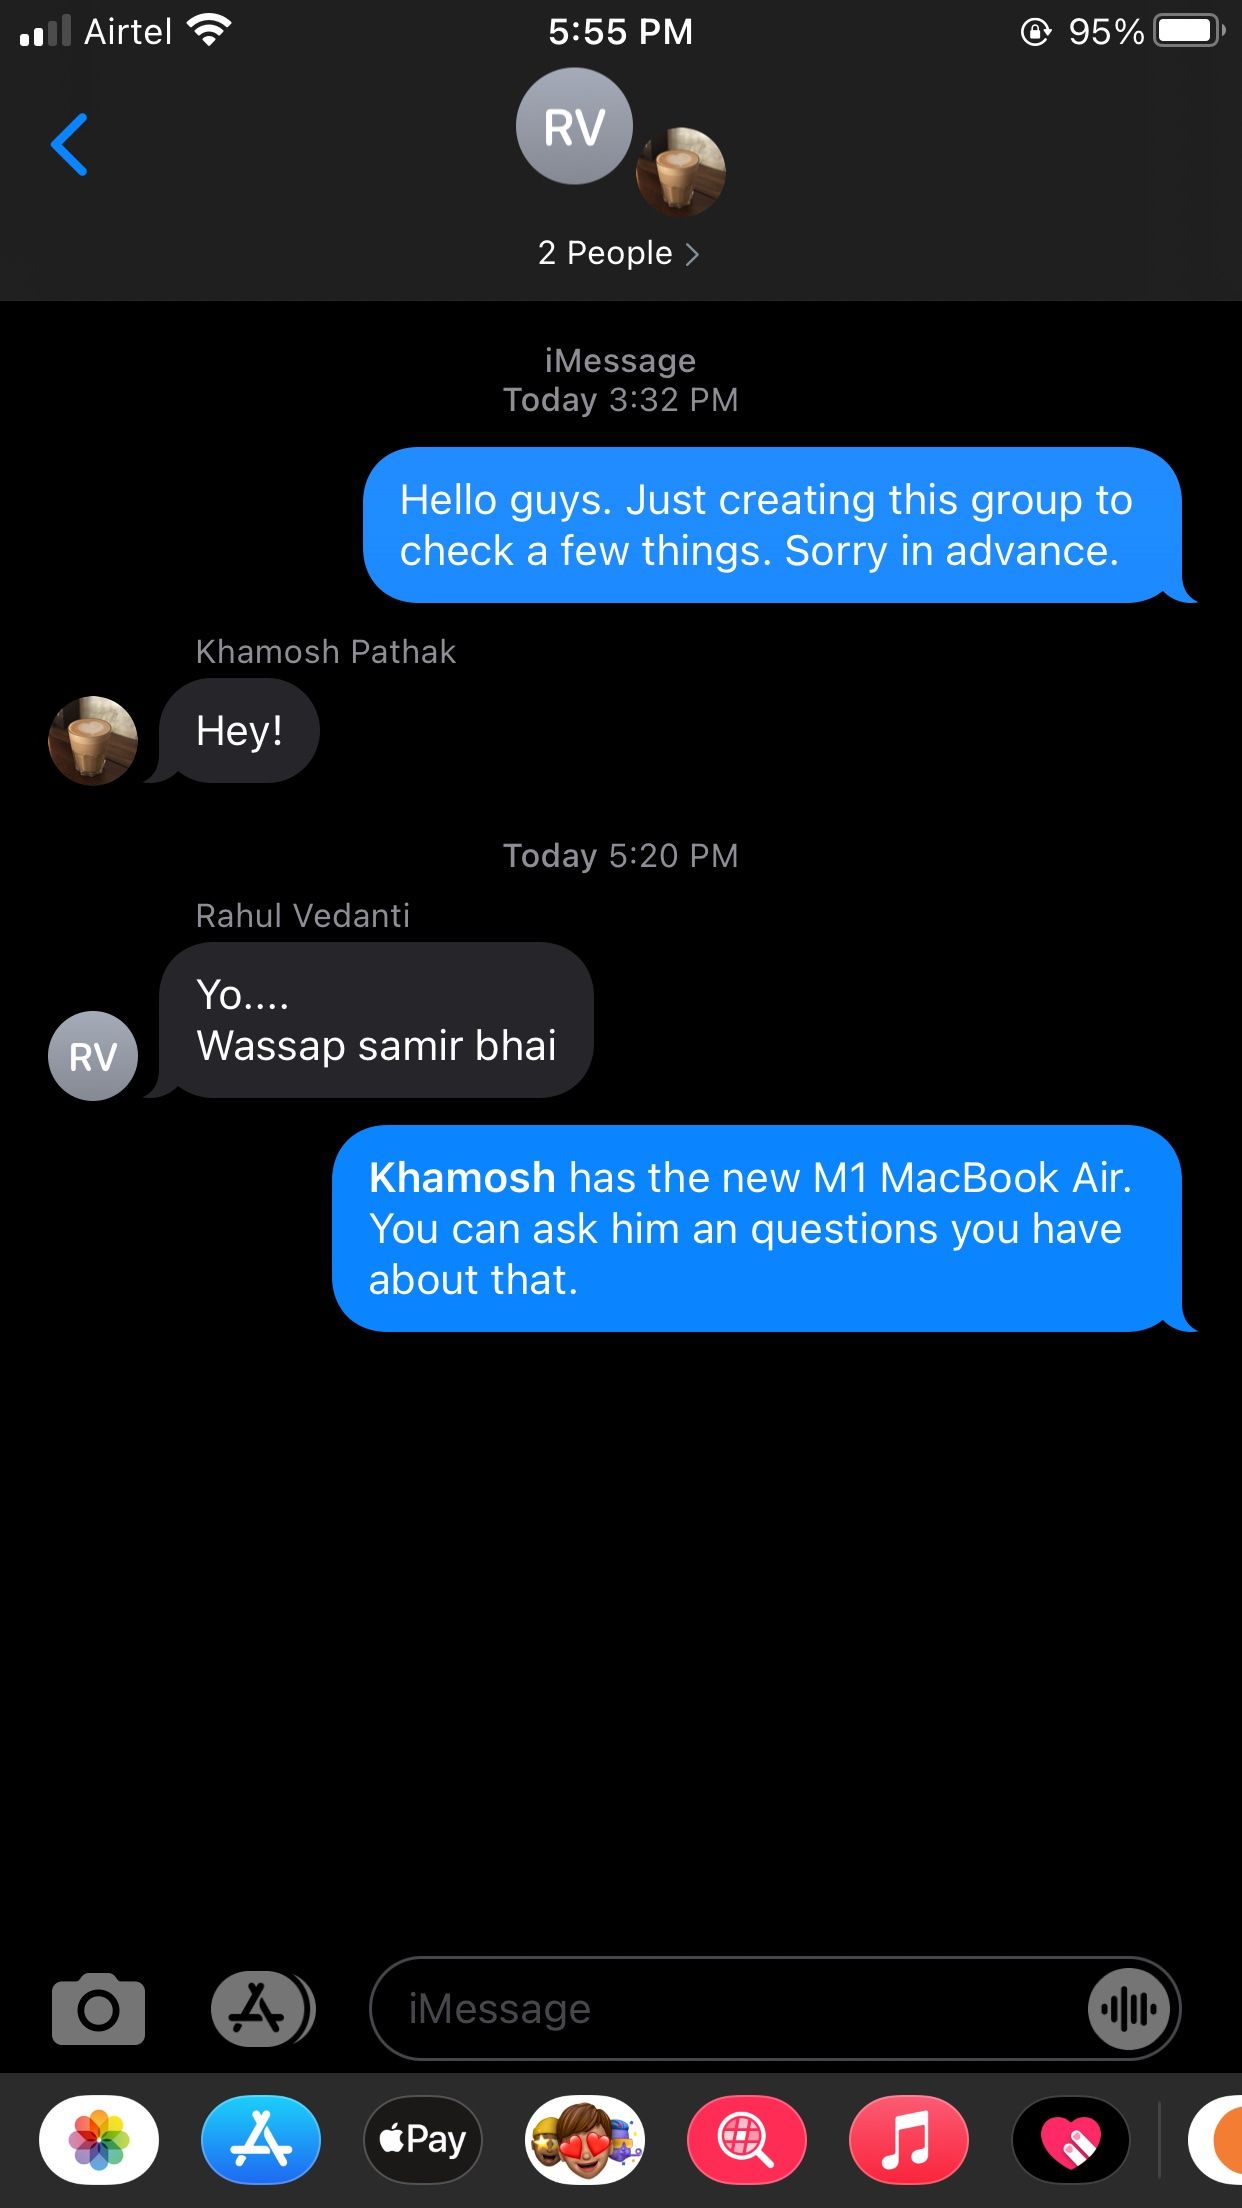 Mentioned Name appears in Bold in iMessage group chat